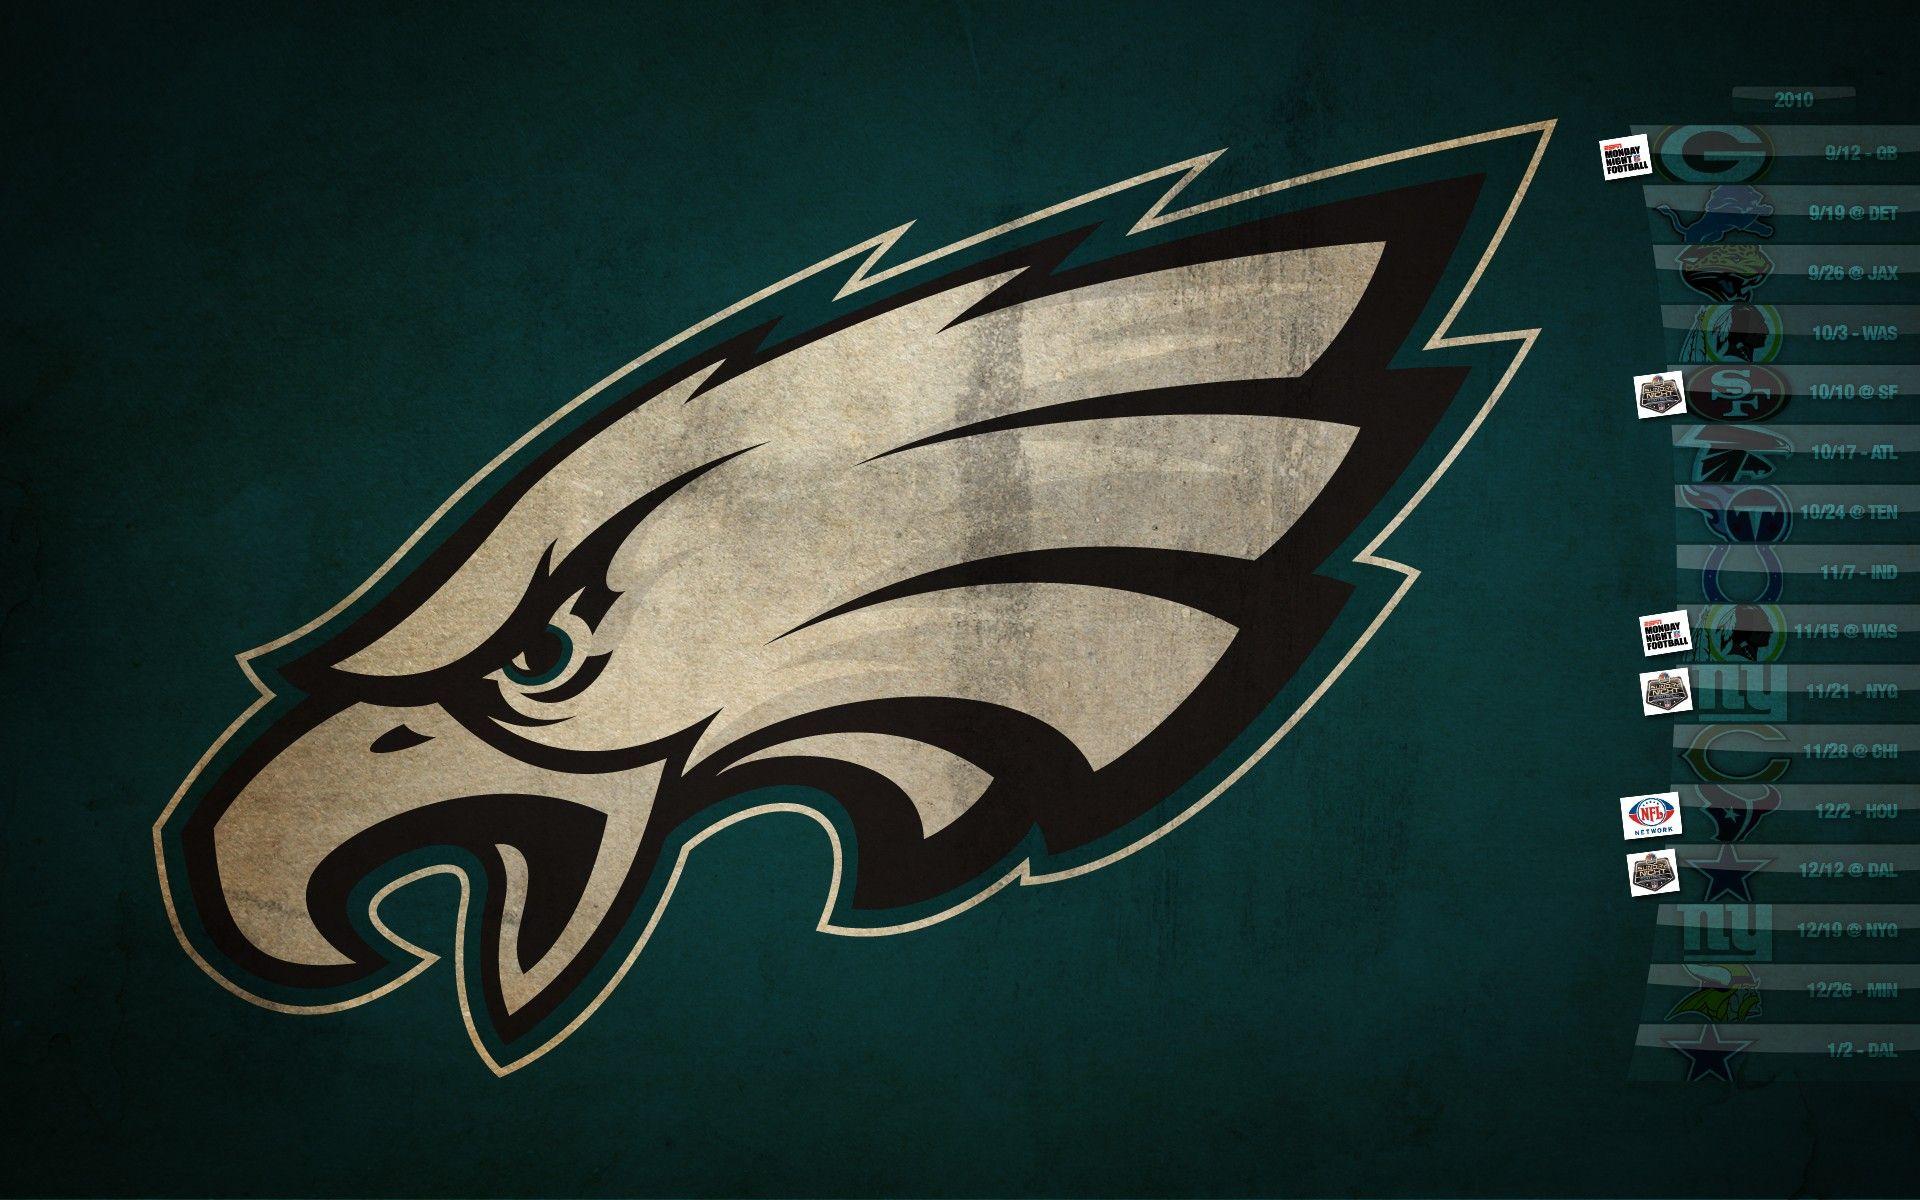 Best Eagles Wallpapers on HipWallpapers